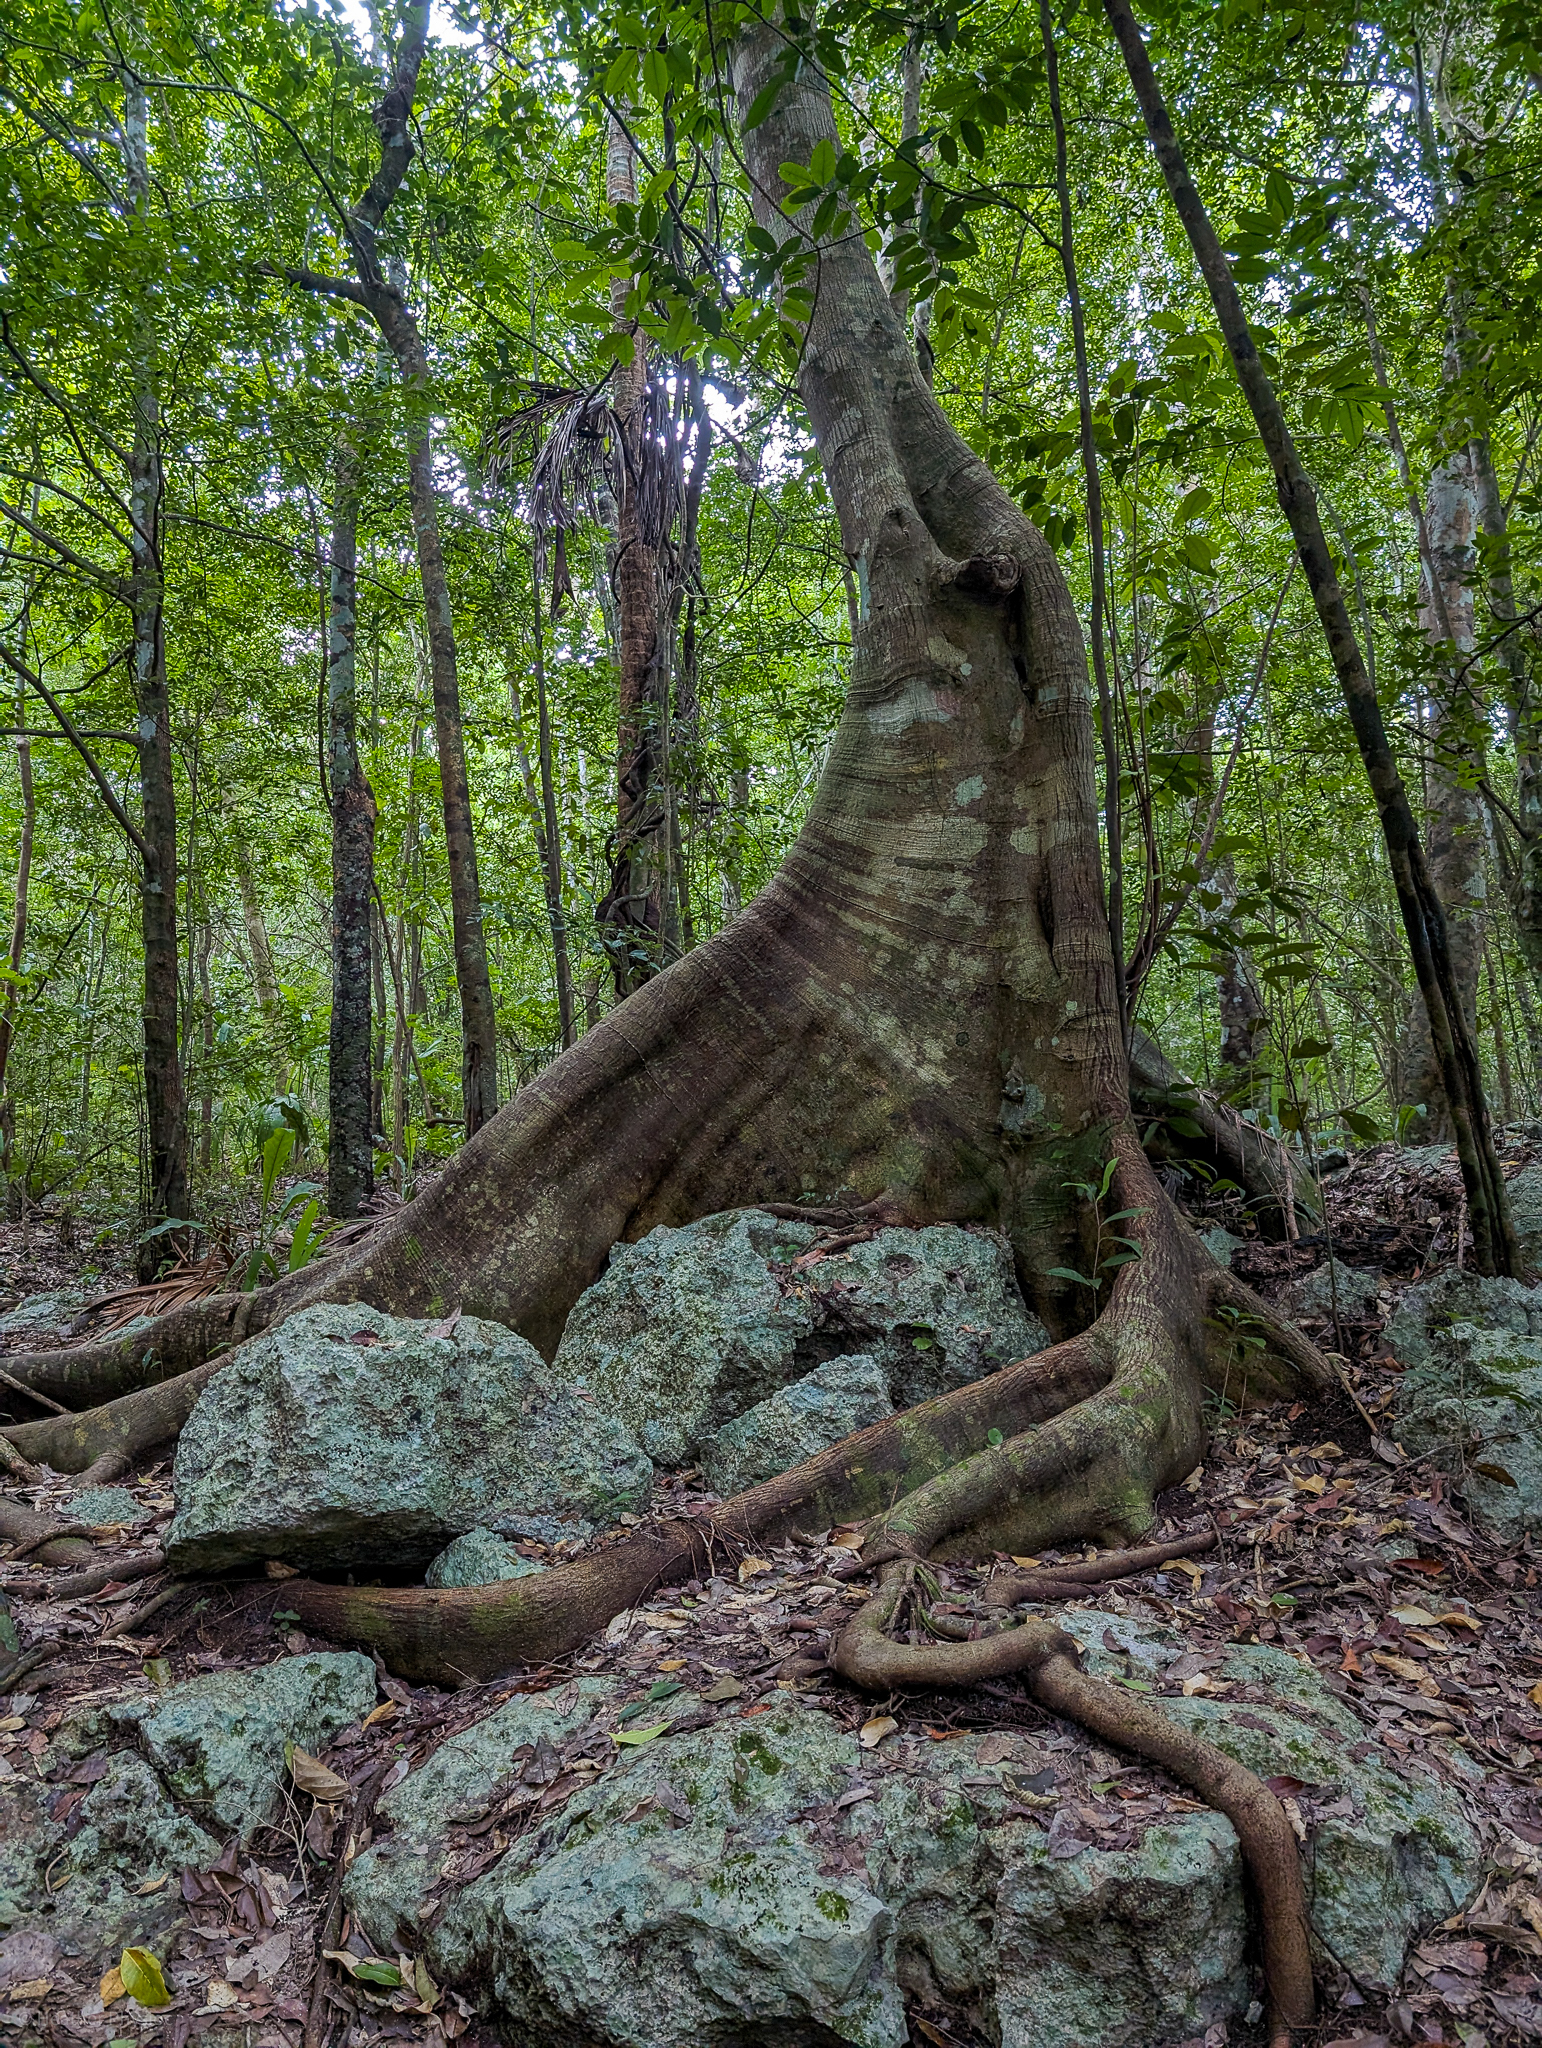 The mighty roots of a kapok tree spread out over the rocky forest floor in Tulum, Mexico. The tree's large buttress roots give it a powerful presence in the dense tropical jungle, showcasing the biodiversity and strength of the Yucatan ecosystem.